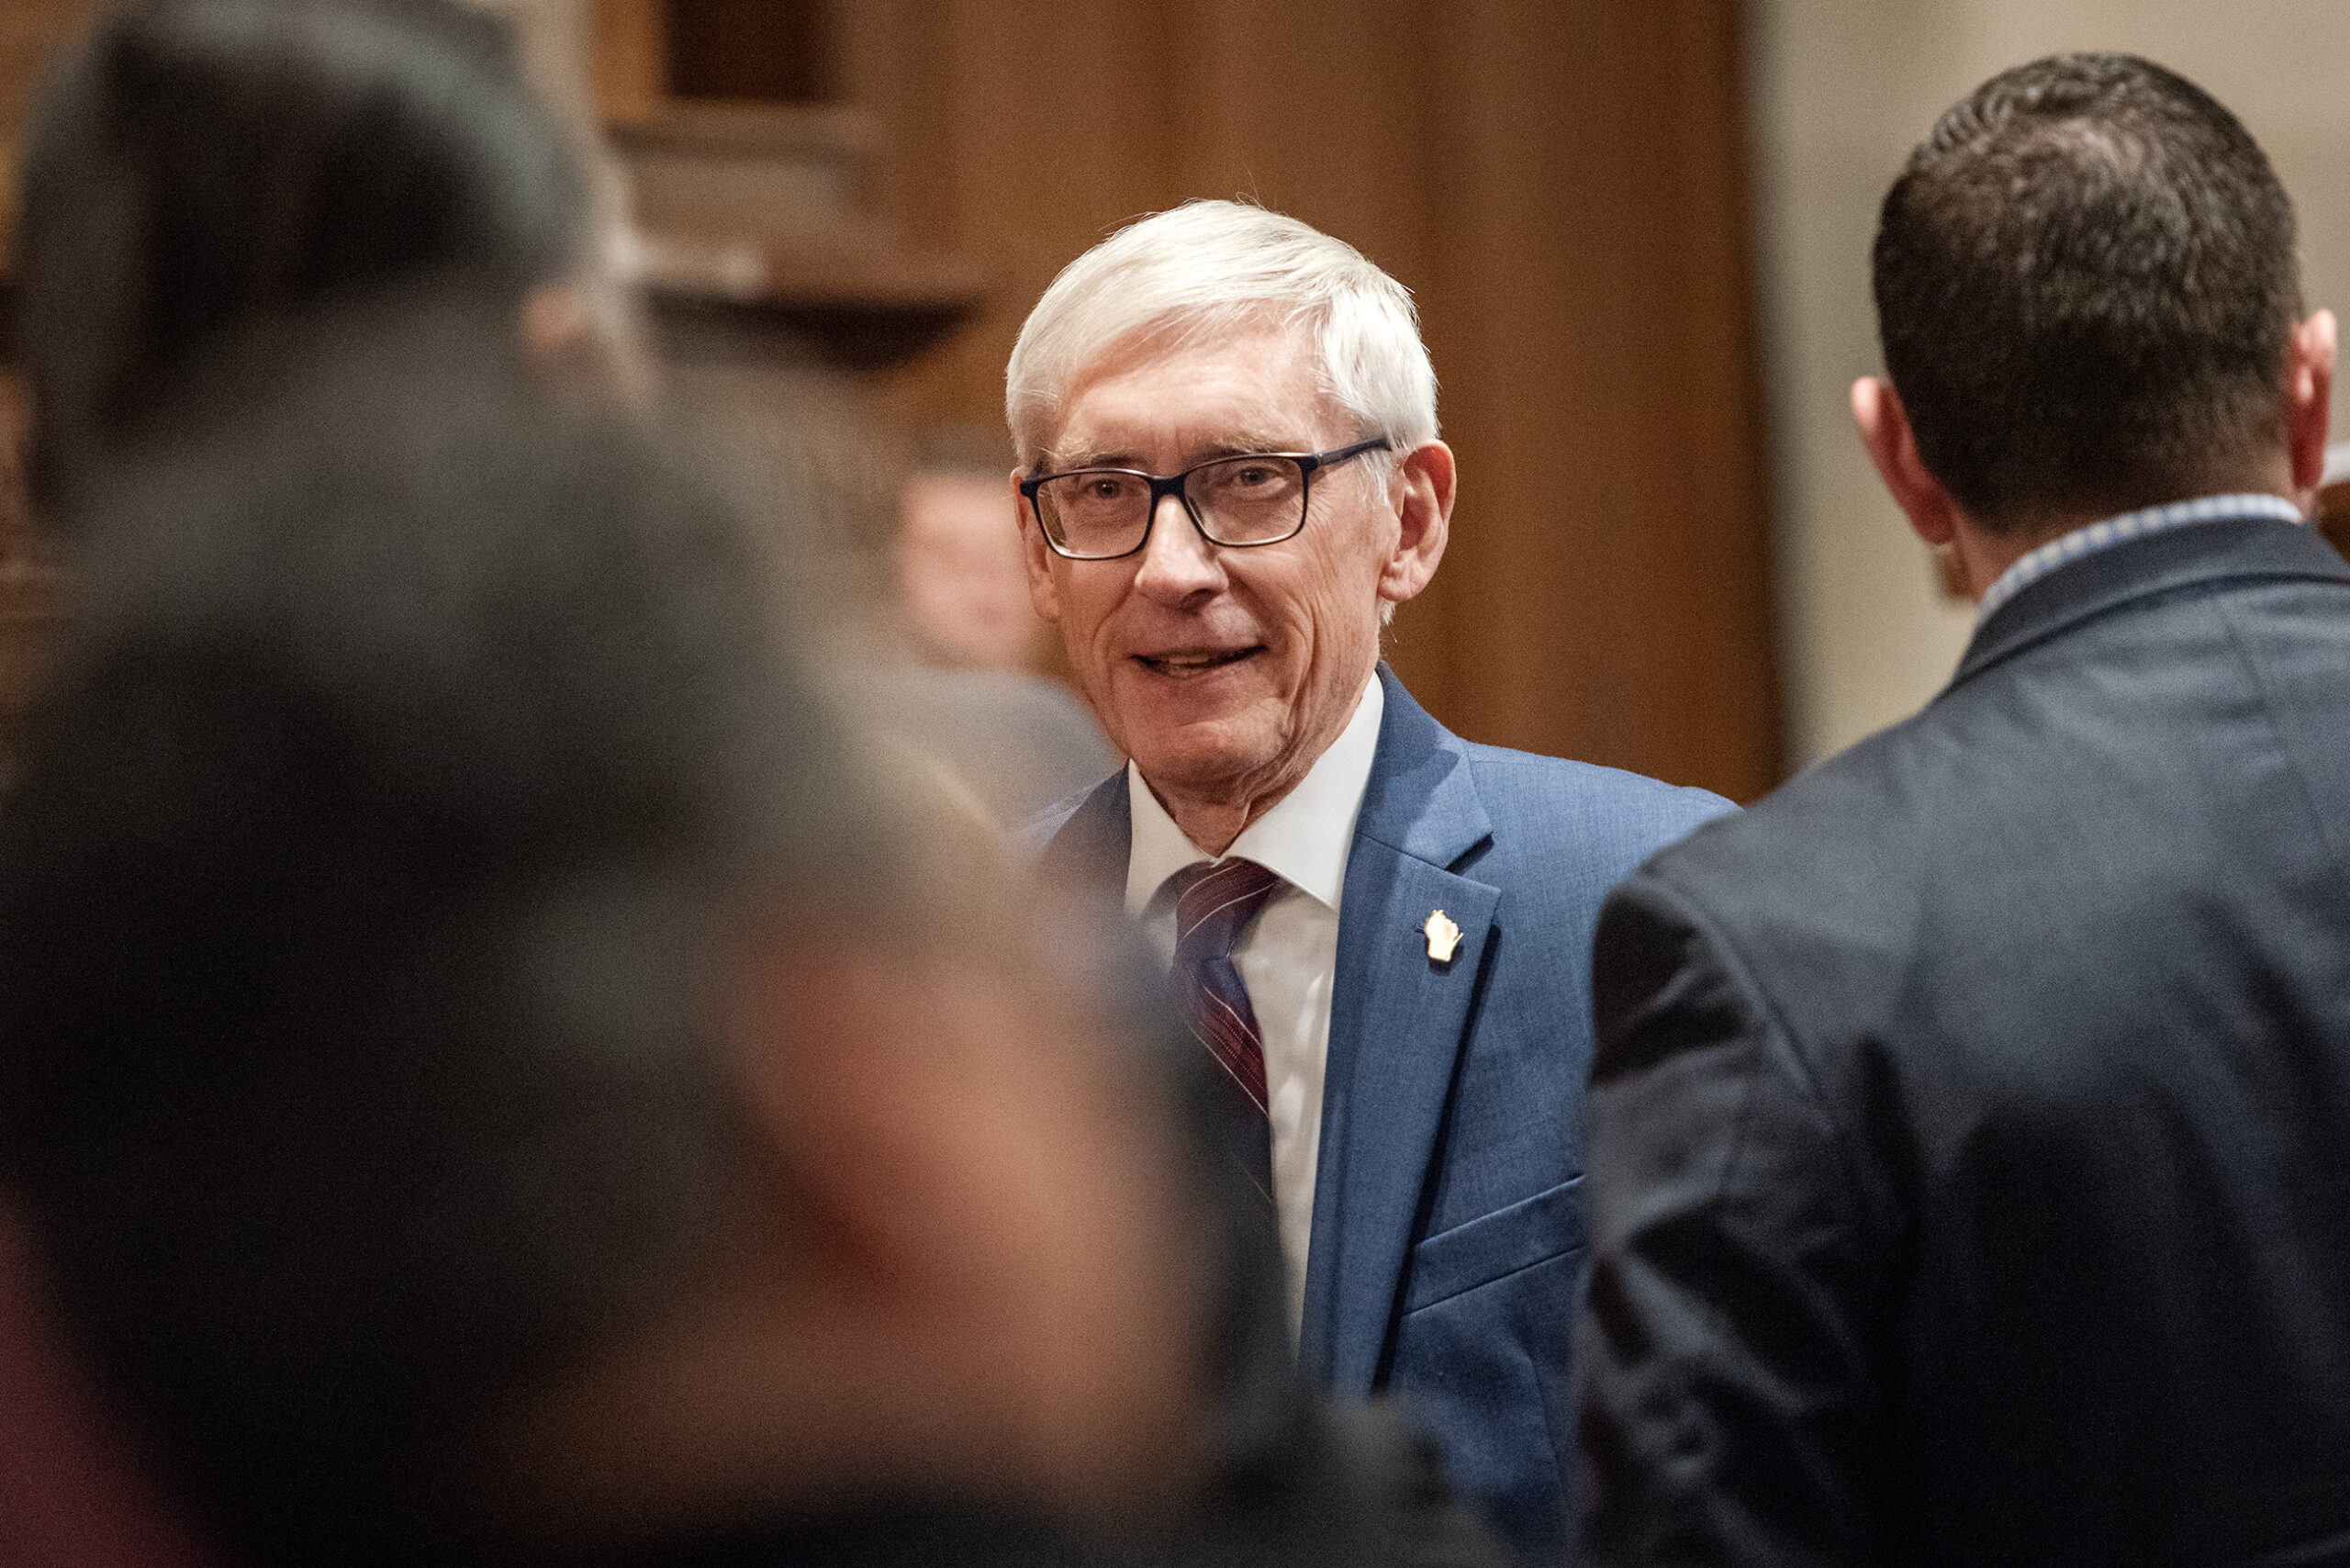 Gov. Evers smiles as he greets lawmakers.